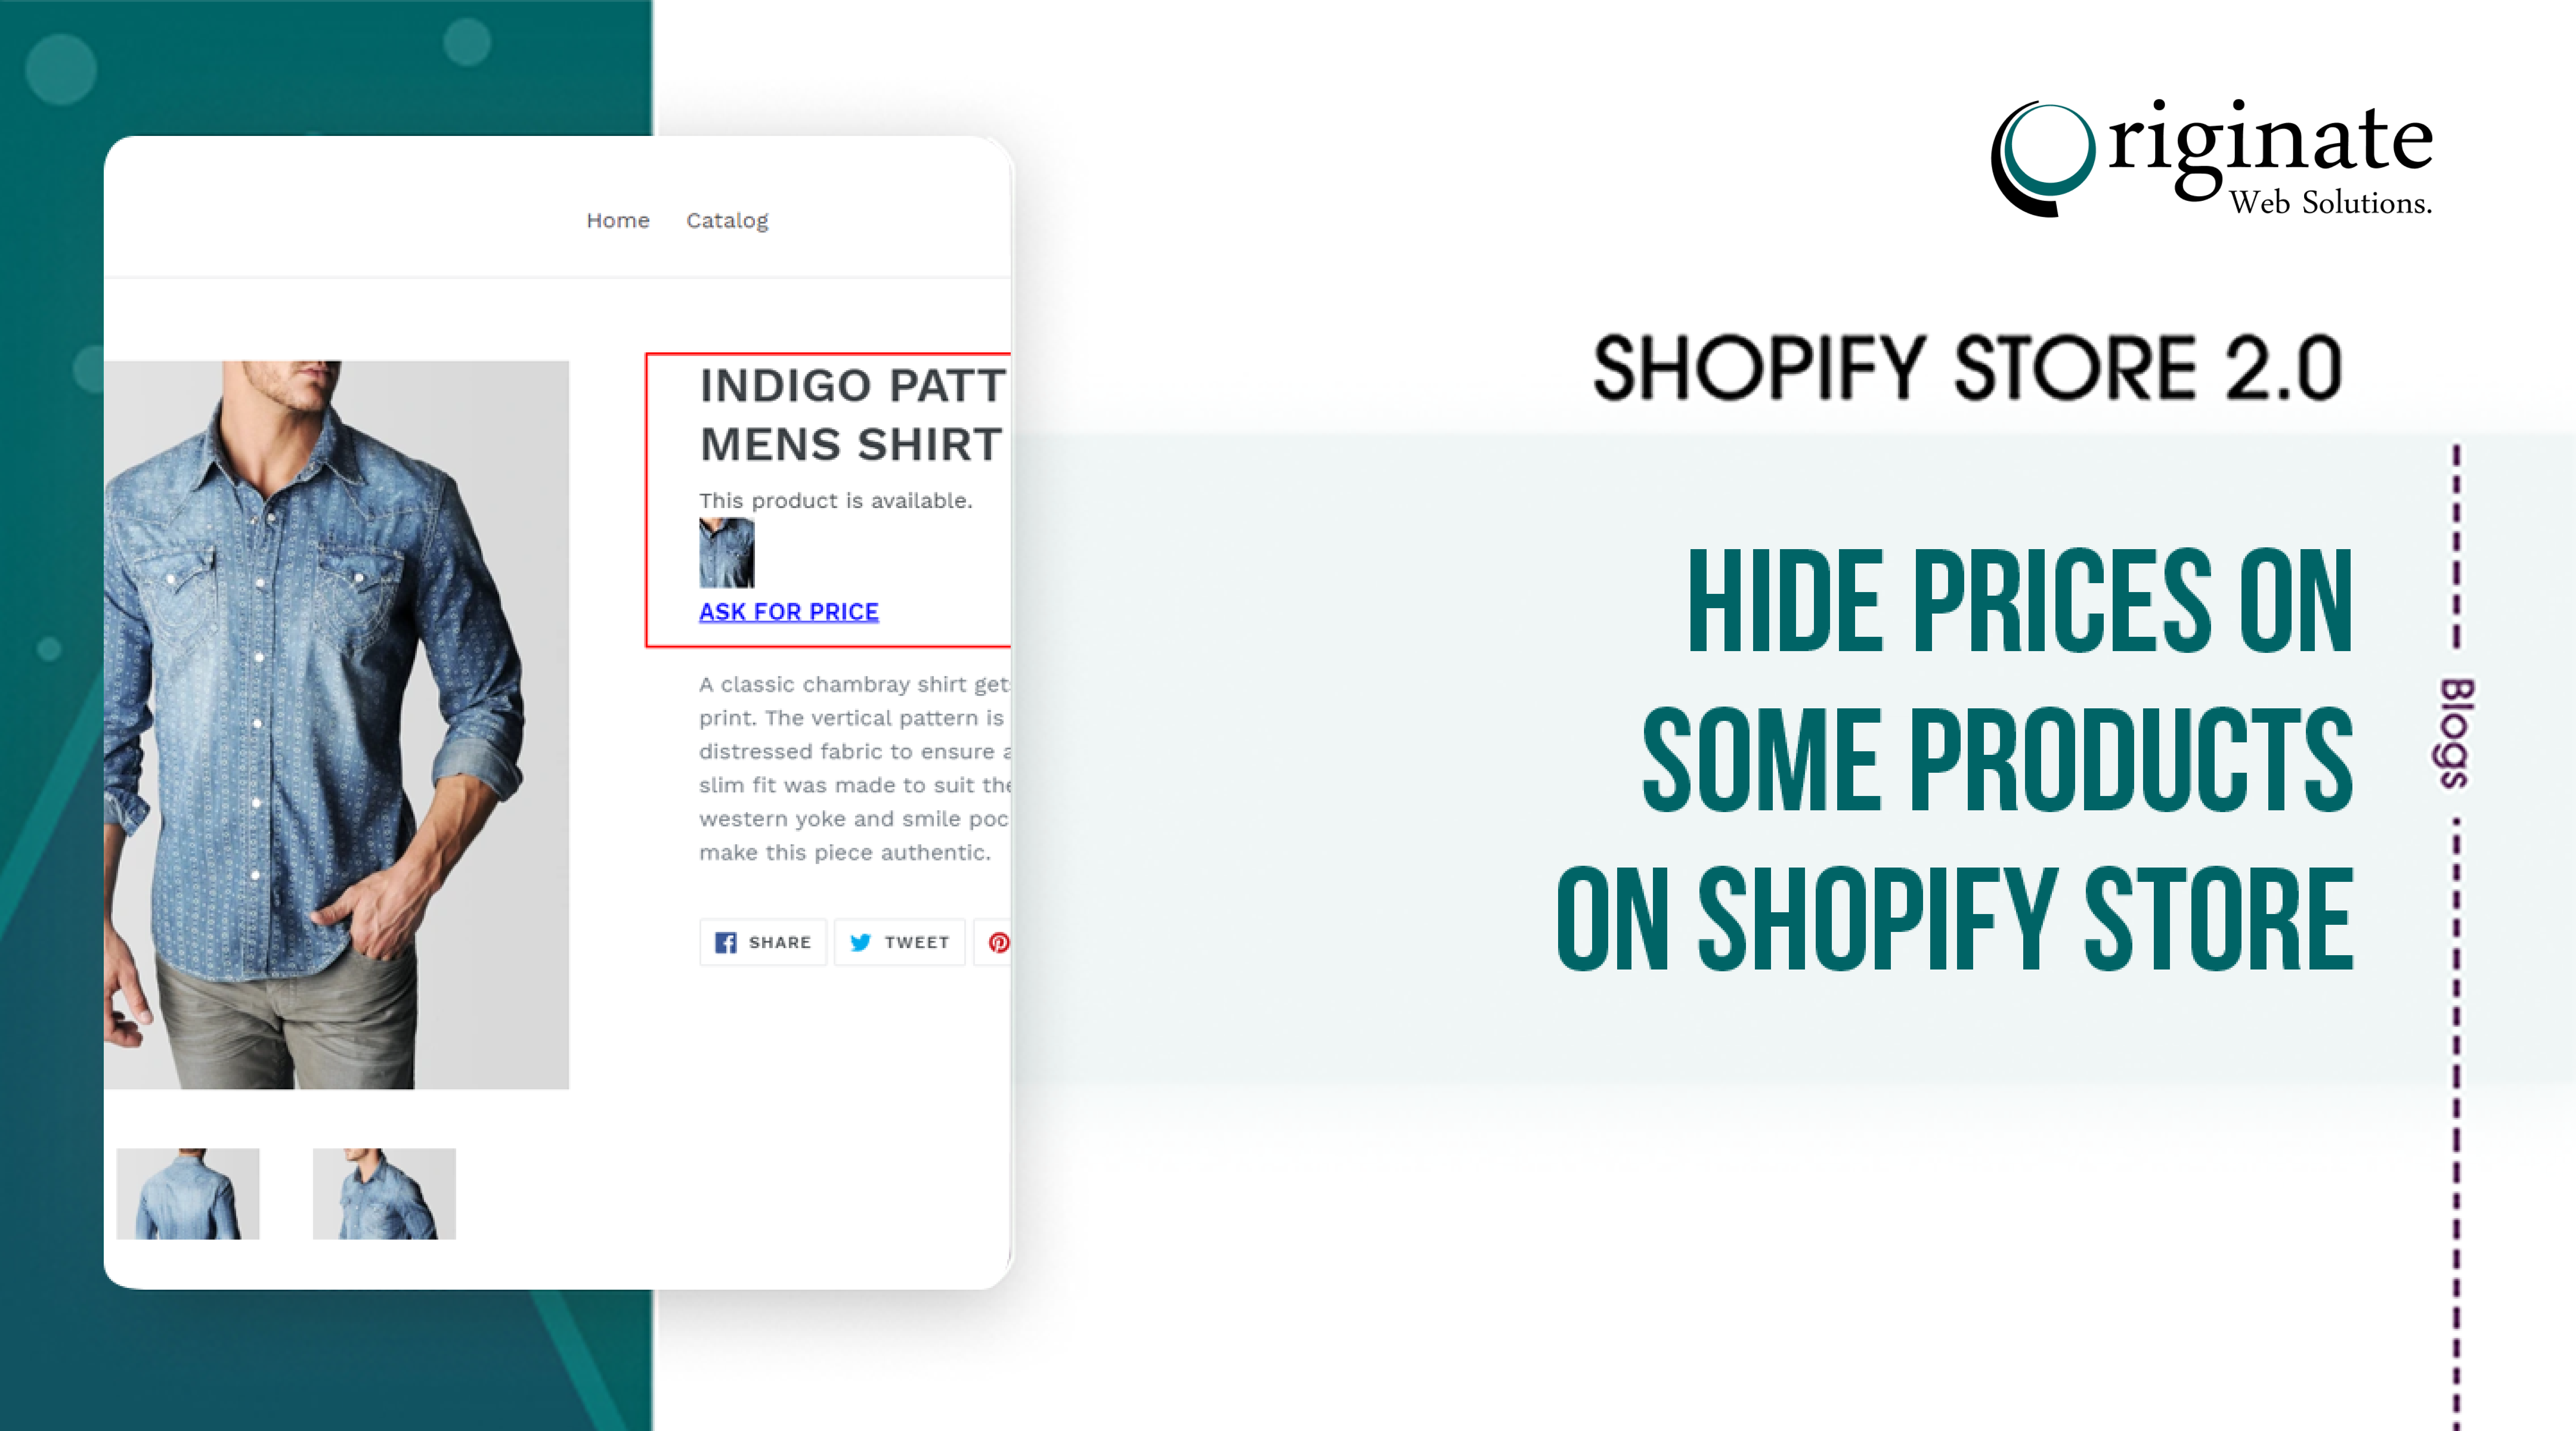 Hide prices on some products on Shopify store